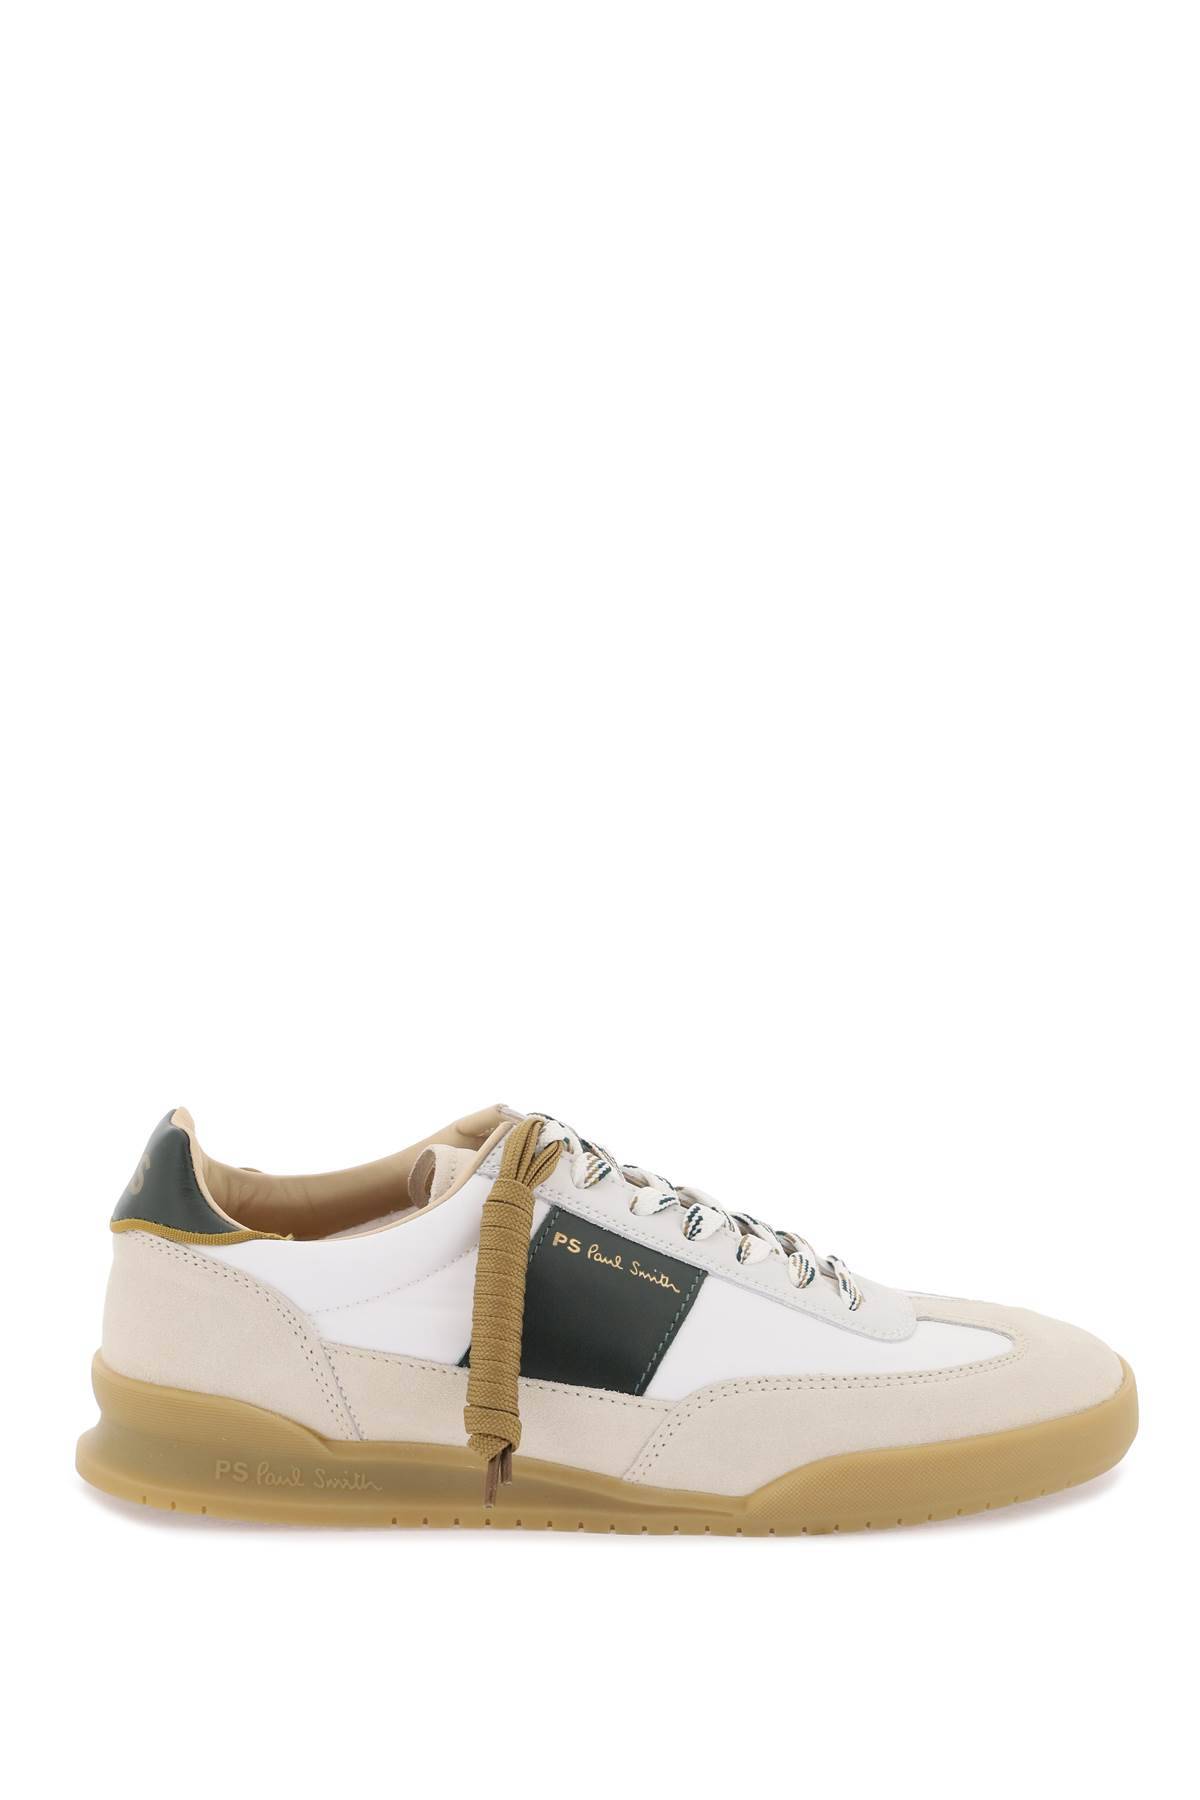 Ps Paul Smith PS PAUL SMITH leather and nylon dover sneakers in